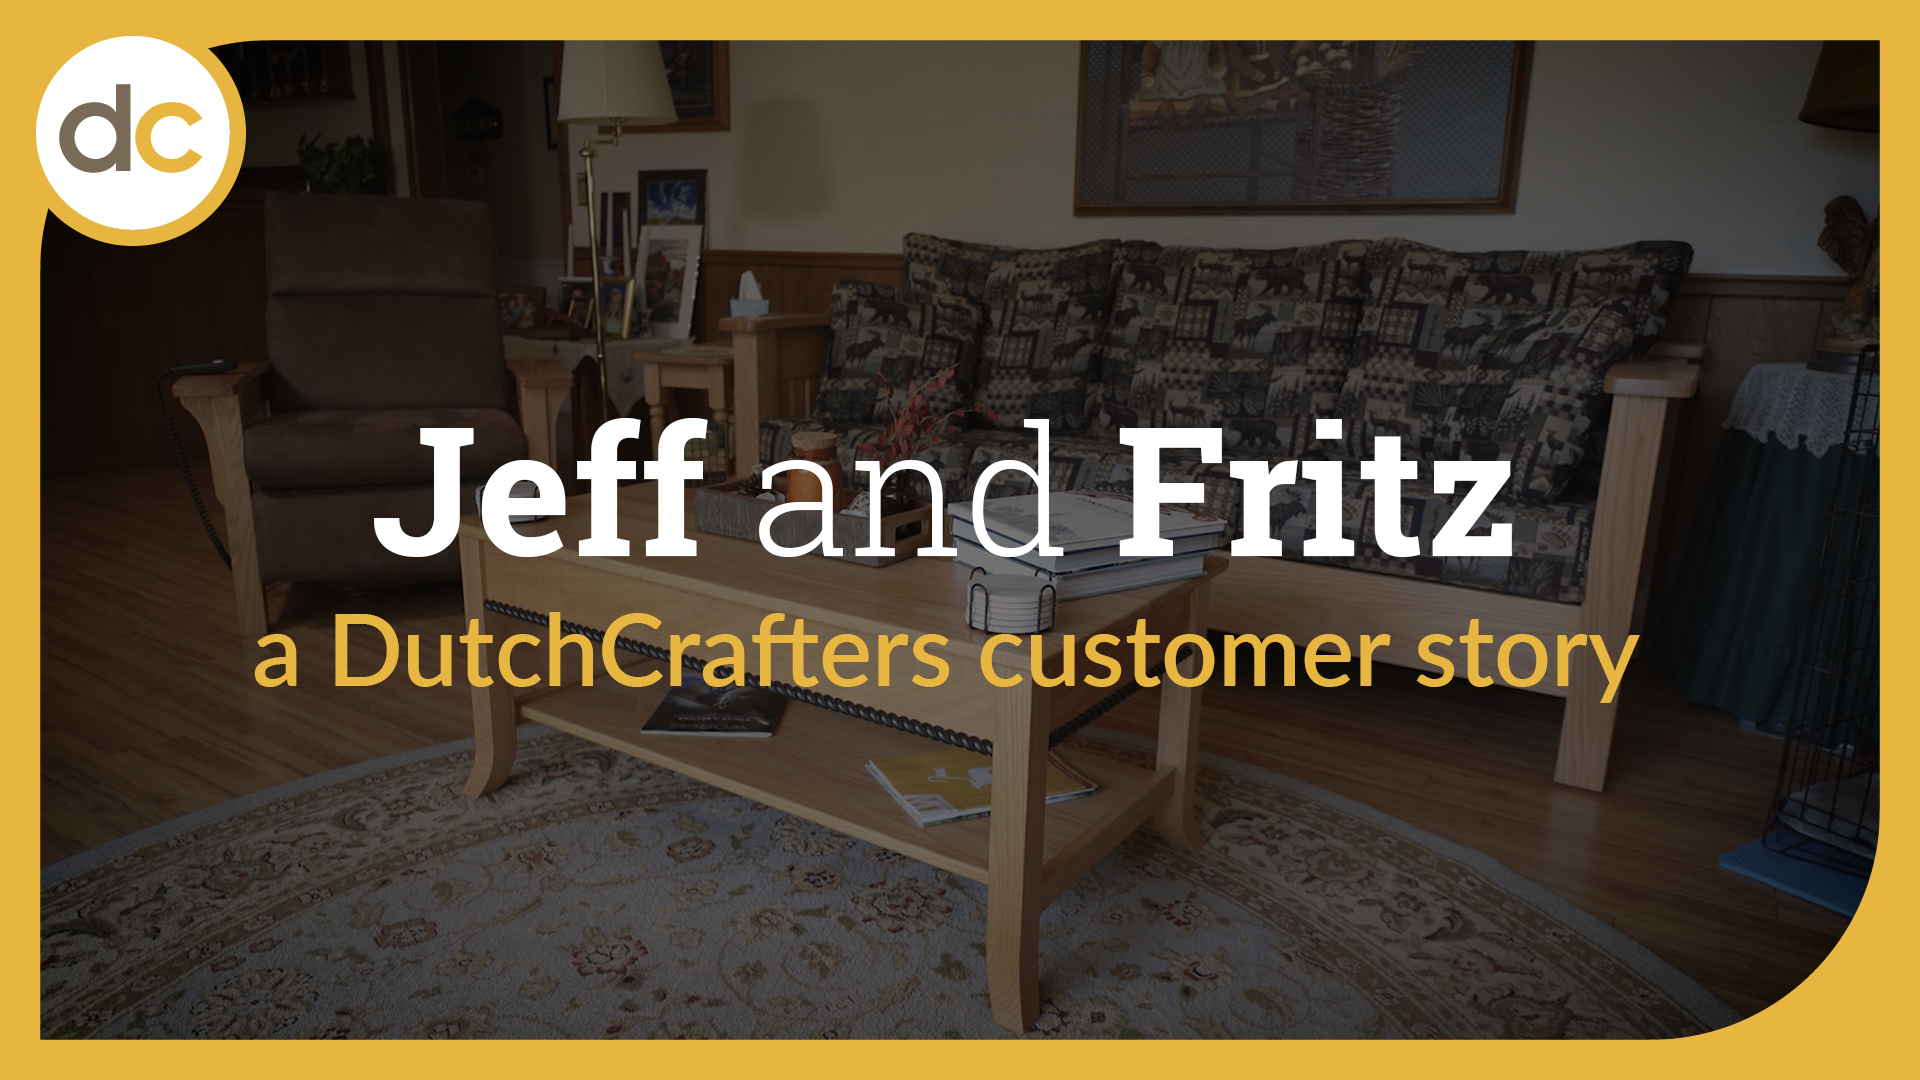 Video thumbnail says, "Jeff and Fritz: a DutchCrafters customer story"